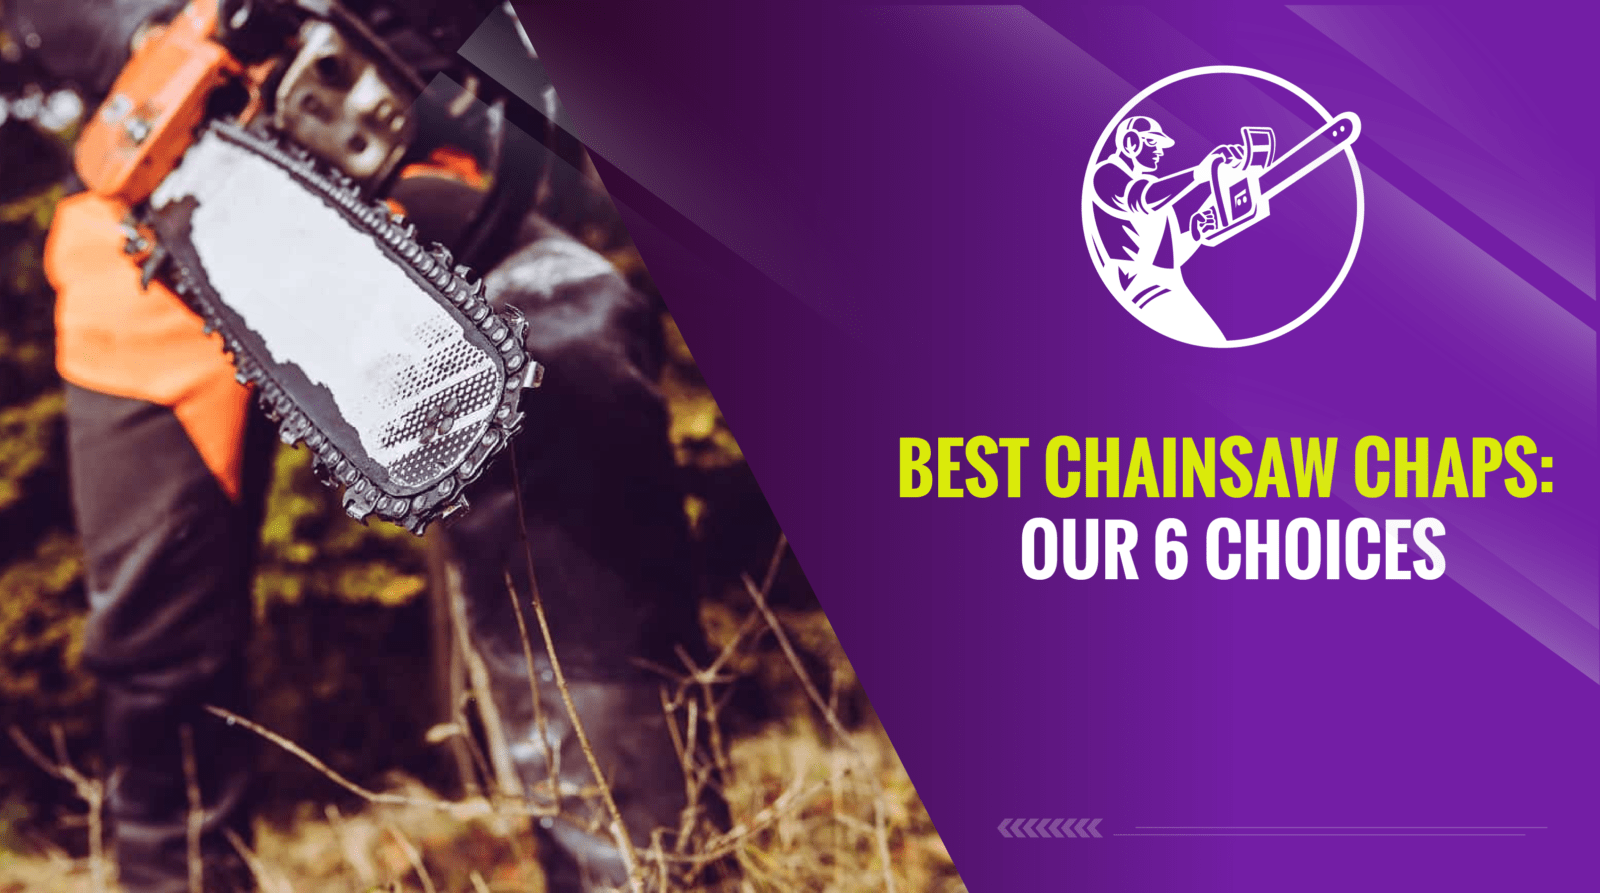 Best Chainsaw Chaps Our 6 Choices